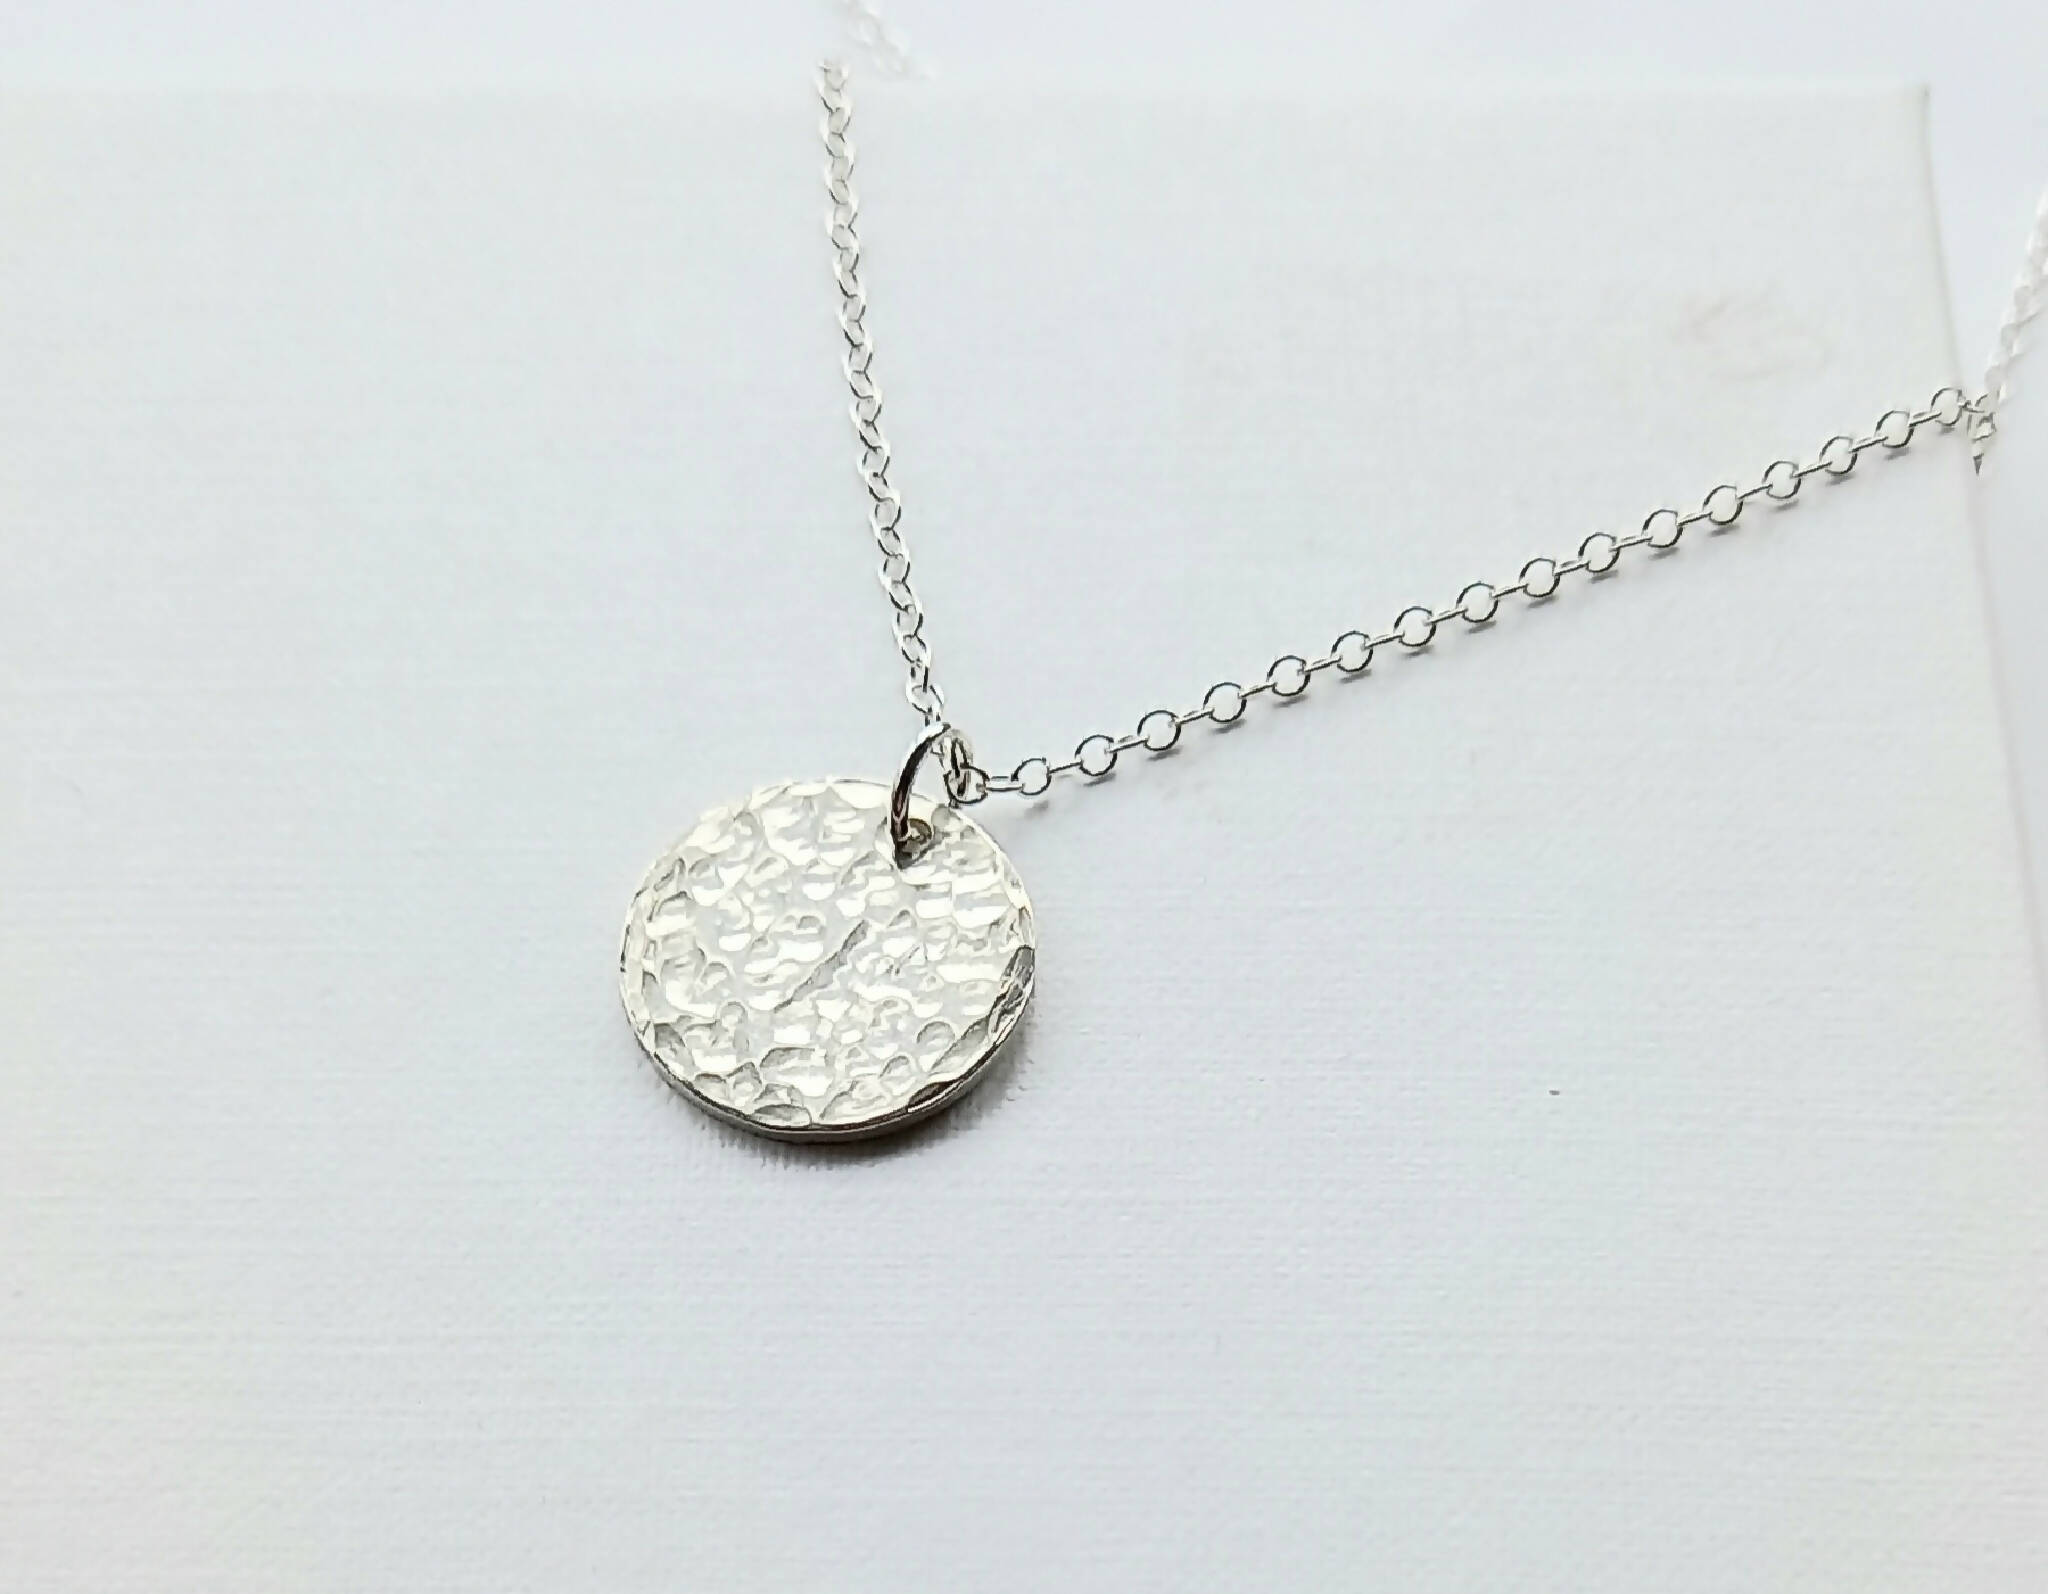 Hammered silver necklace